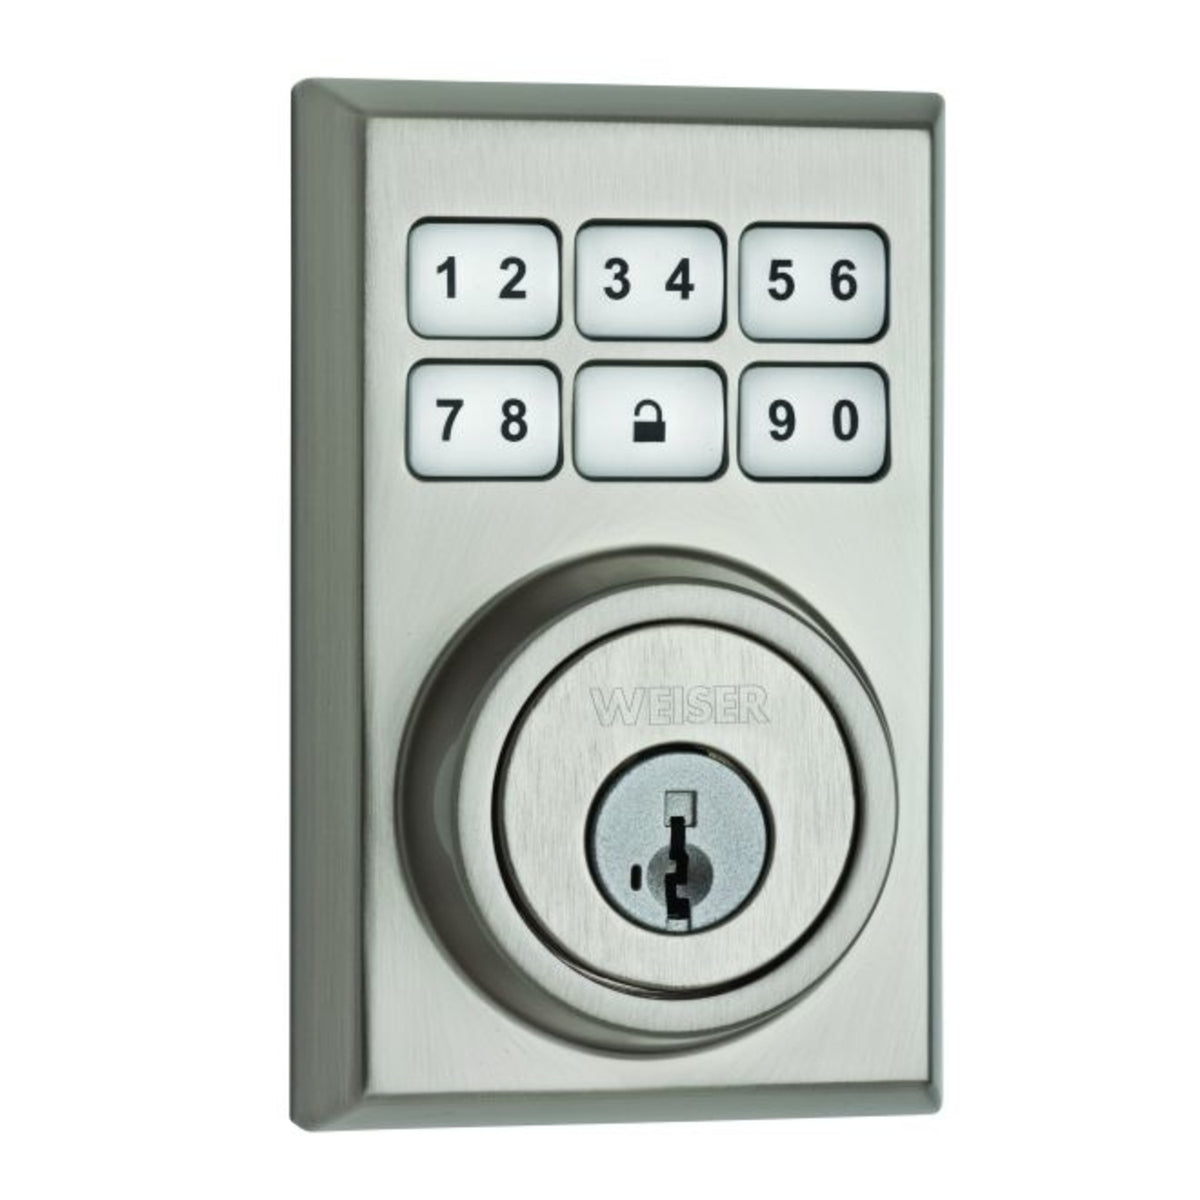 Weiser Lock GED1490CNTMS15S Smartcode Electronic Deadbolt With Smart Key, Satin Nickel